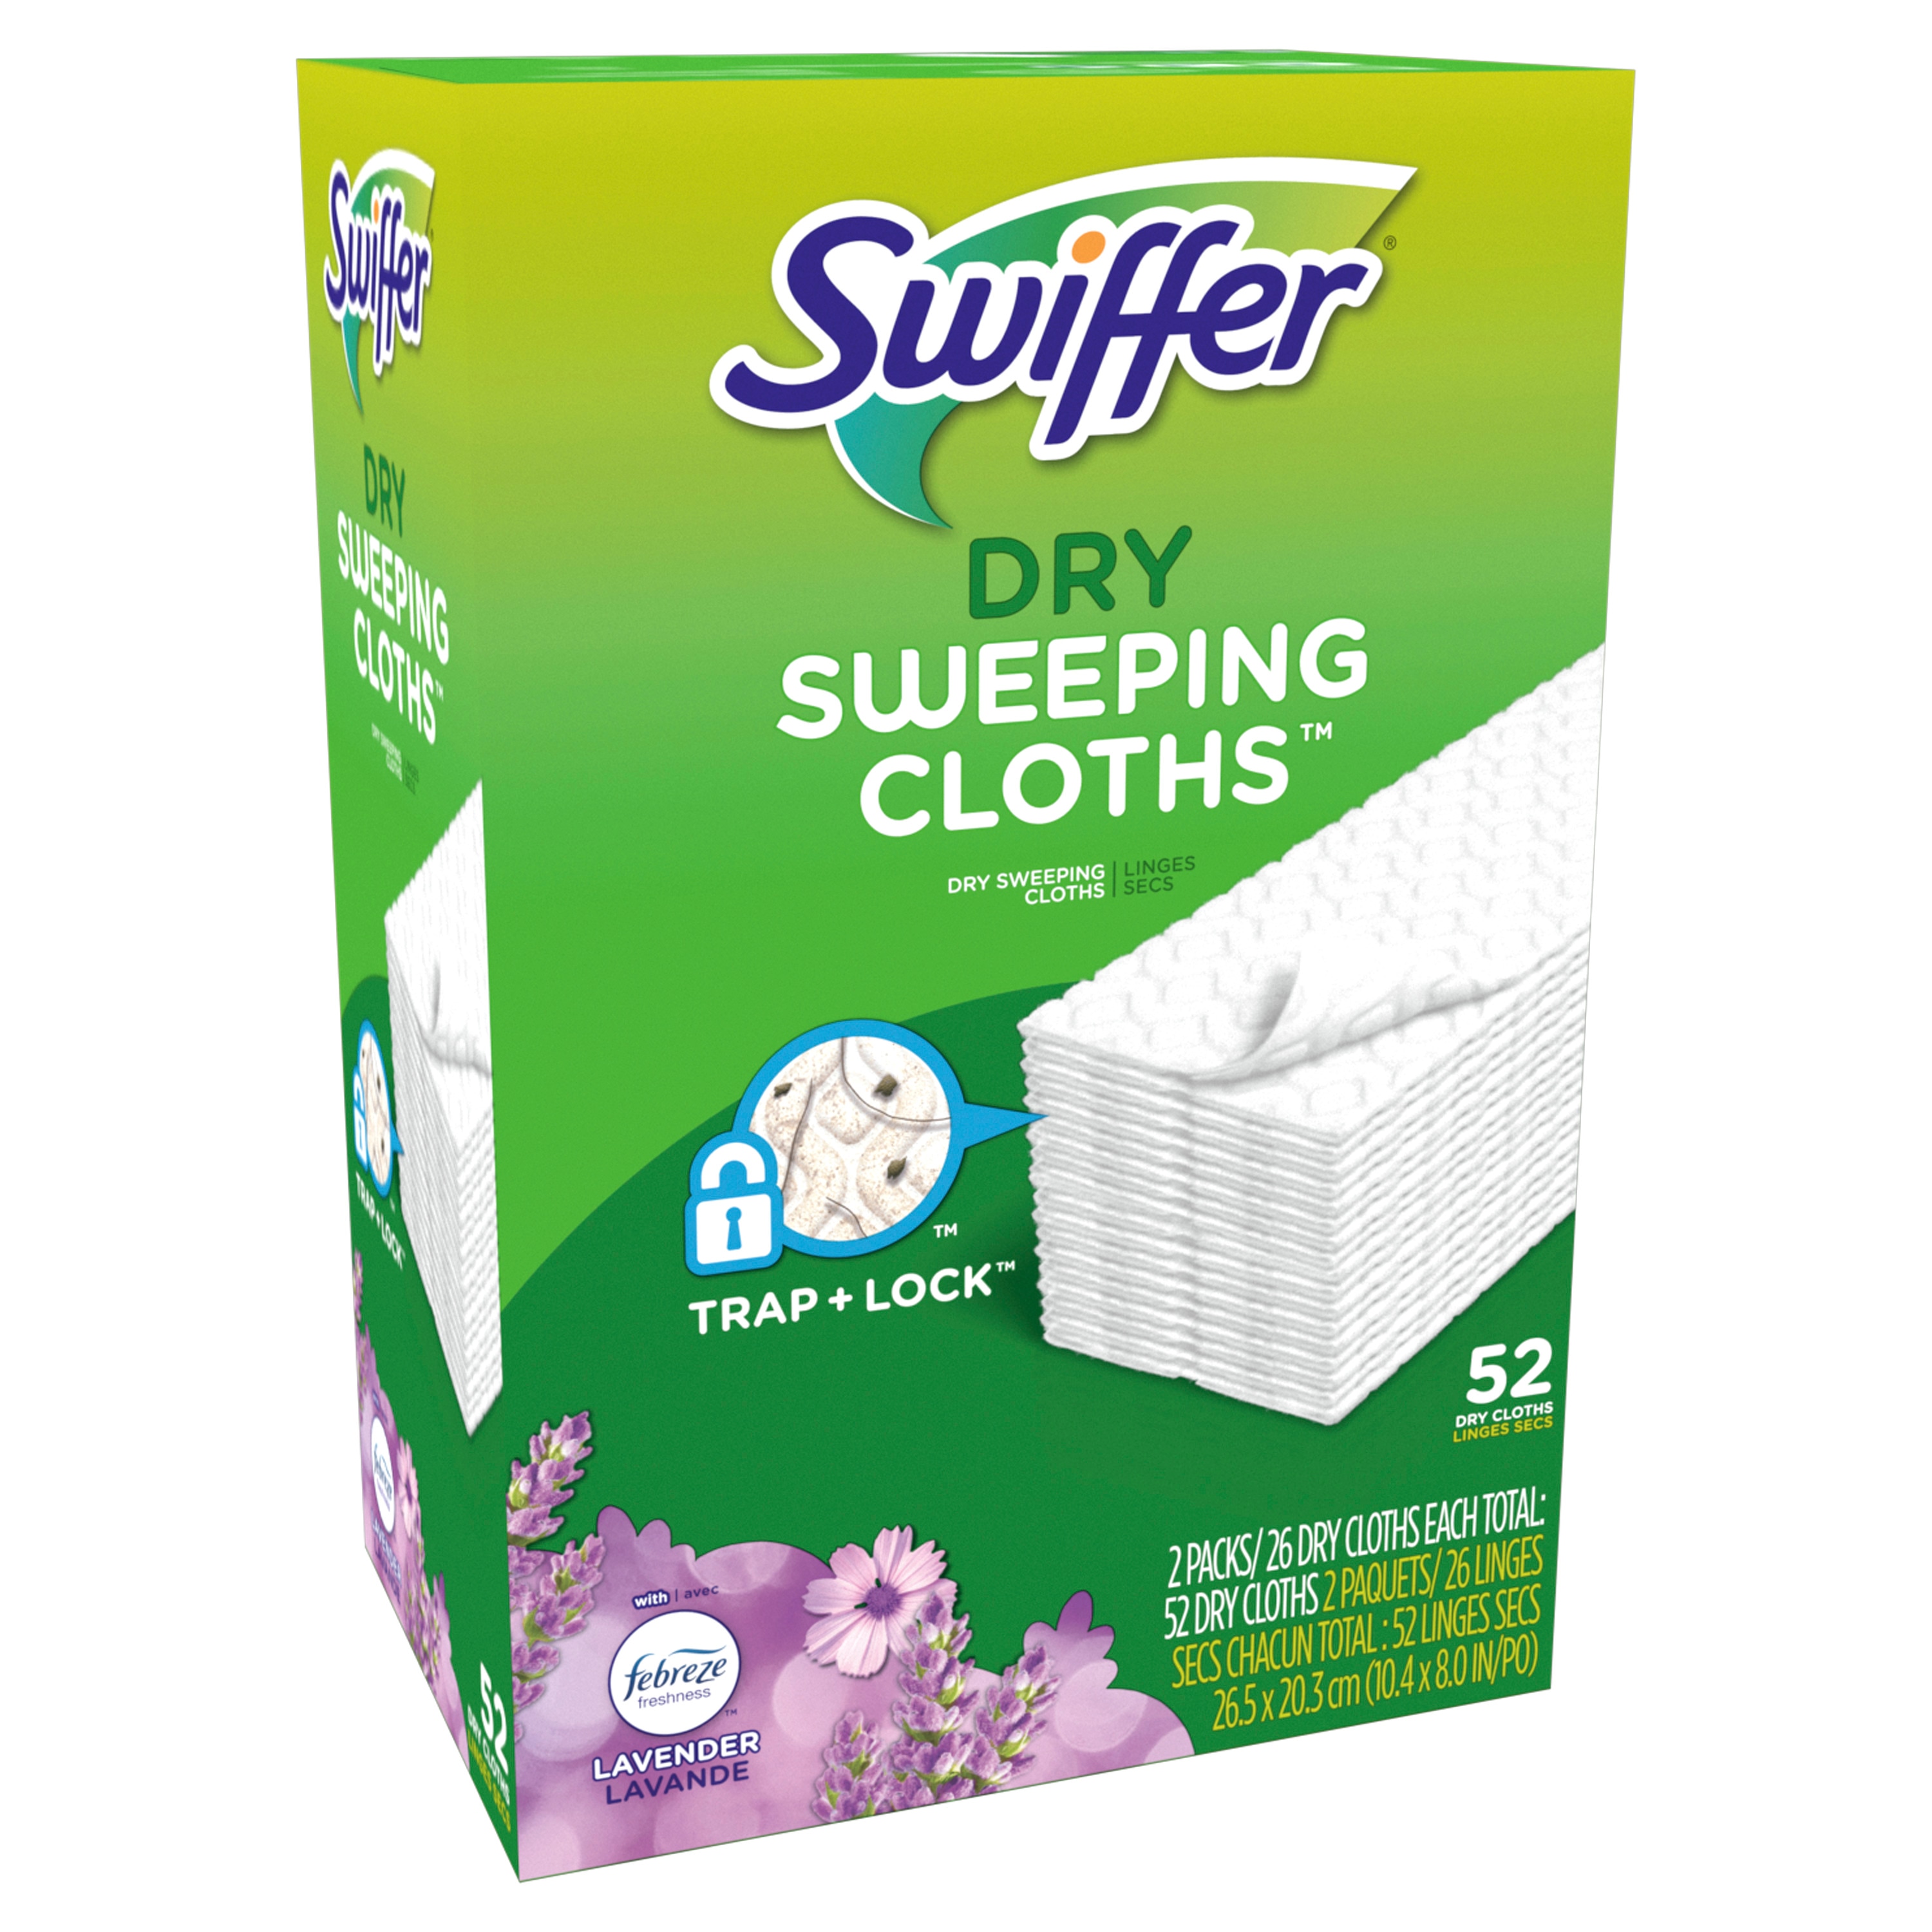 Swiffer Sweeper Multi-Surface Dry Sweeping Cloths Lavender Scent